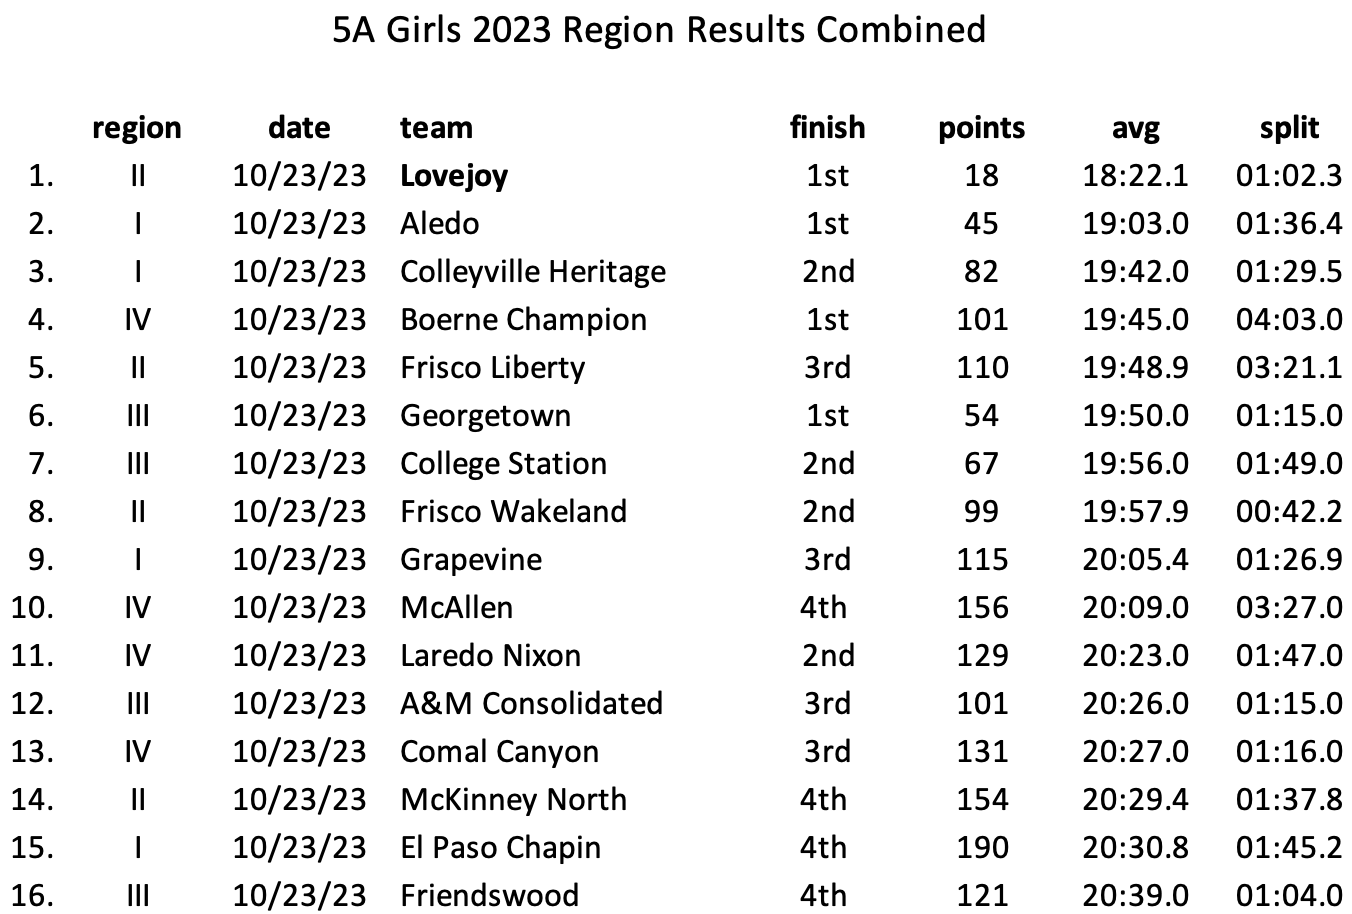 the 5A girls Region results sorted by average times